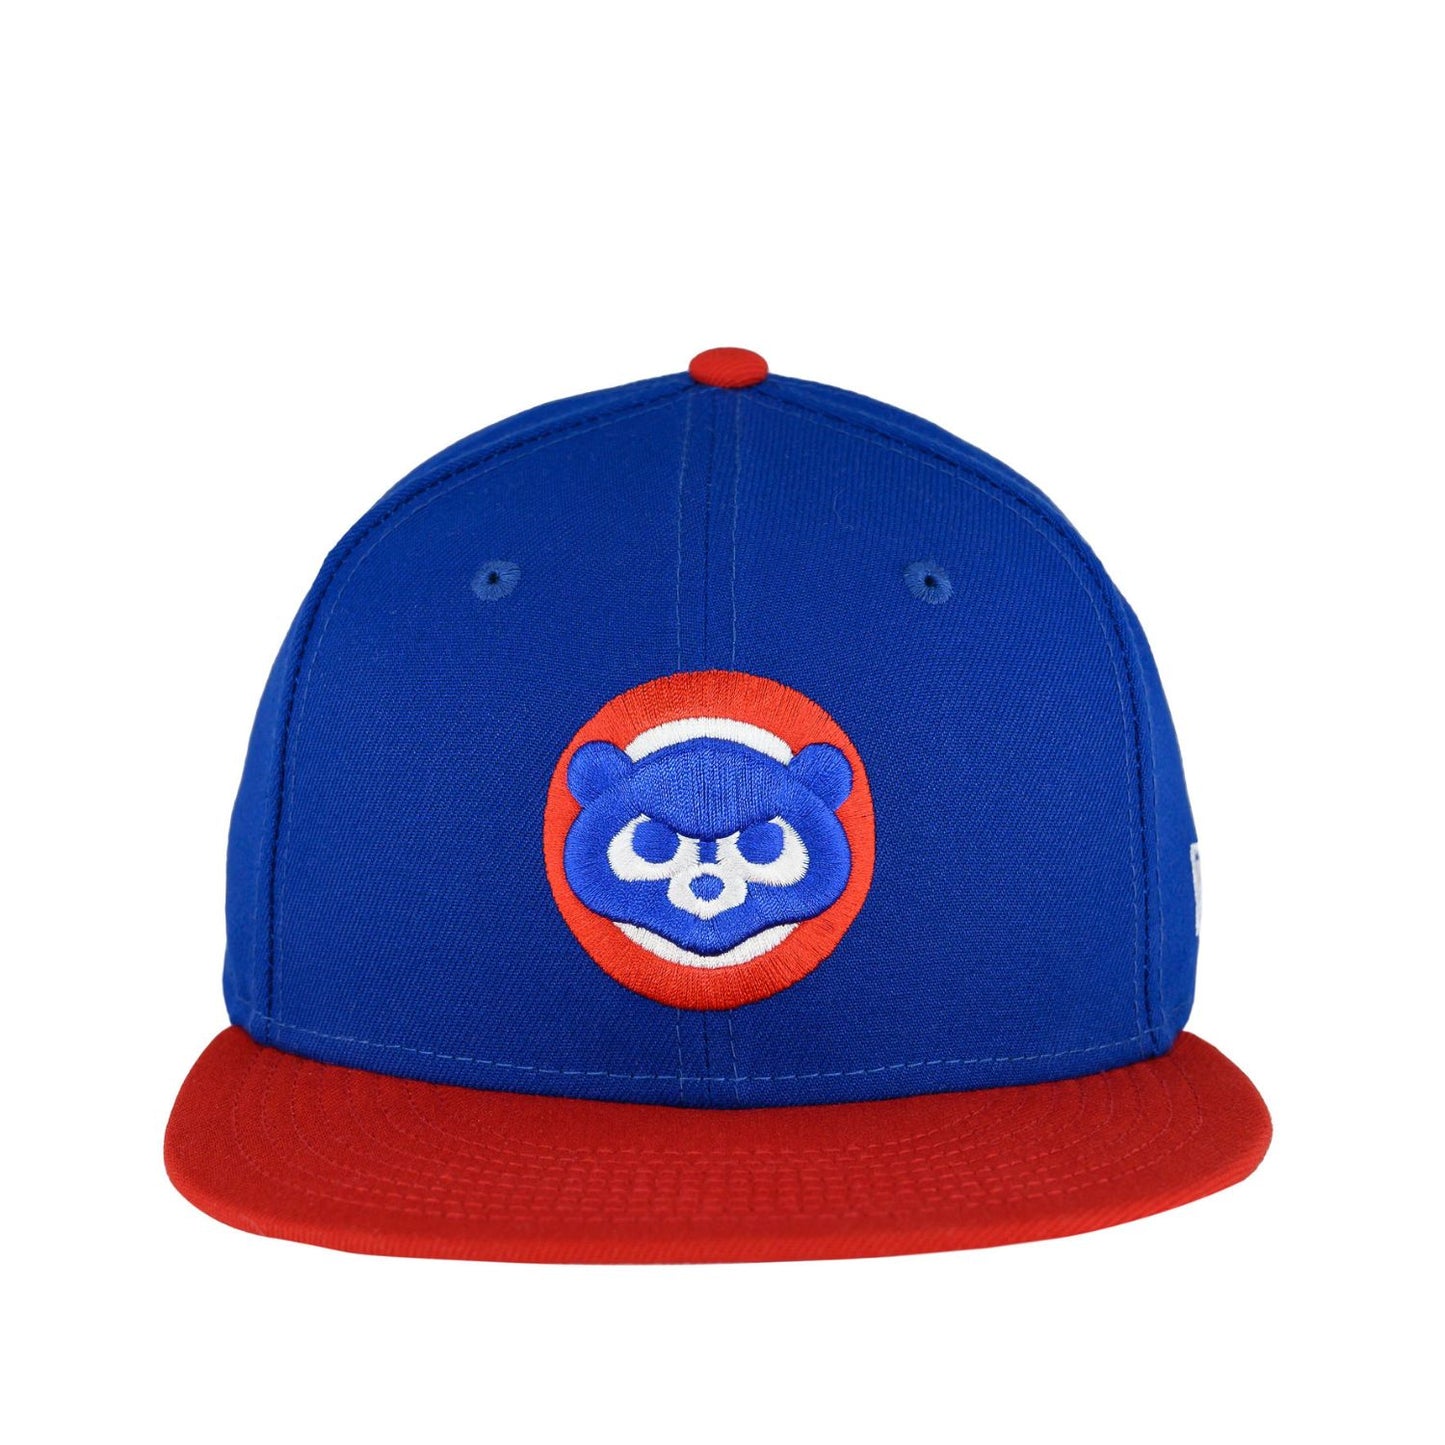 Chicago Cubs Royal/Red '84 New Era 9FIFTY Snapback Hat